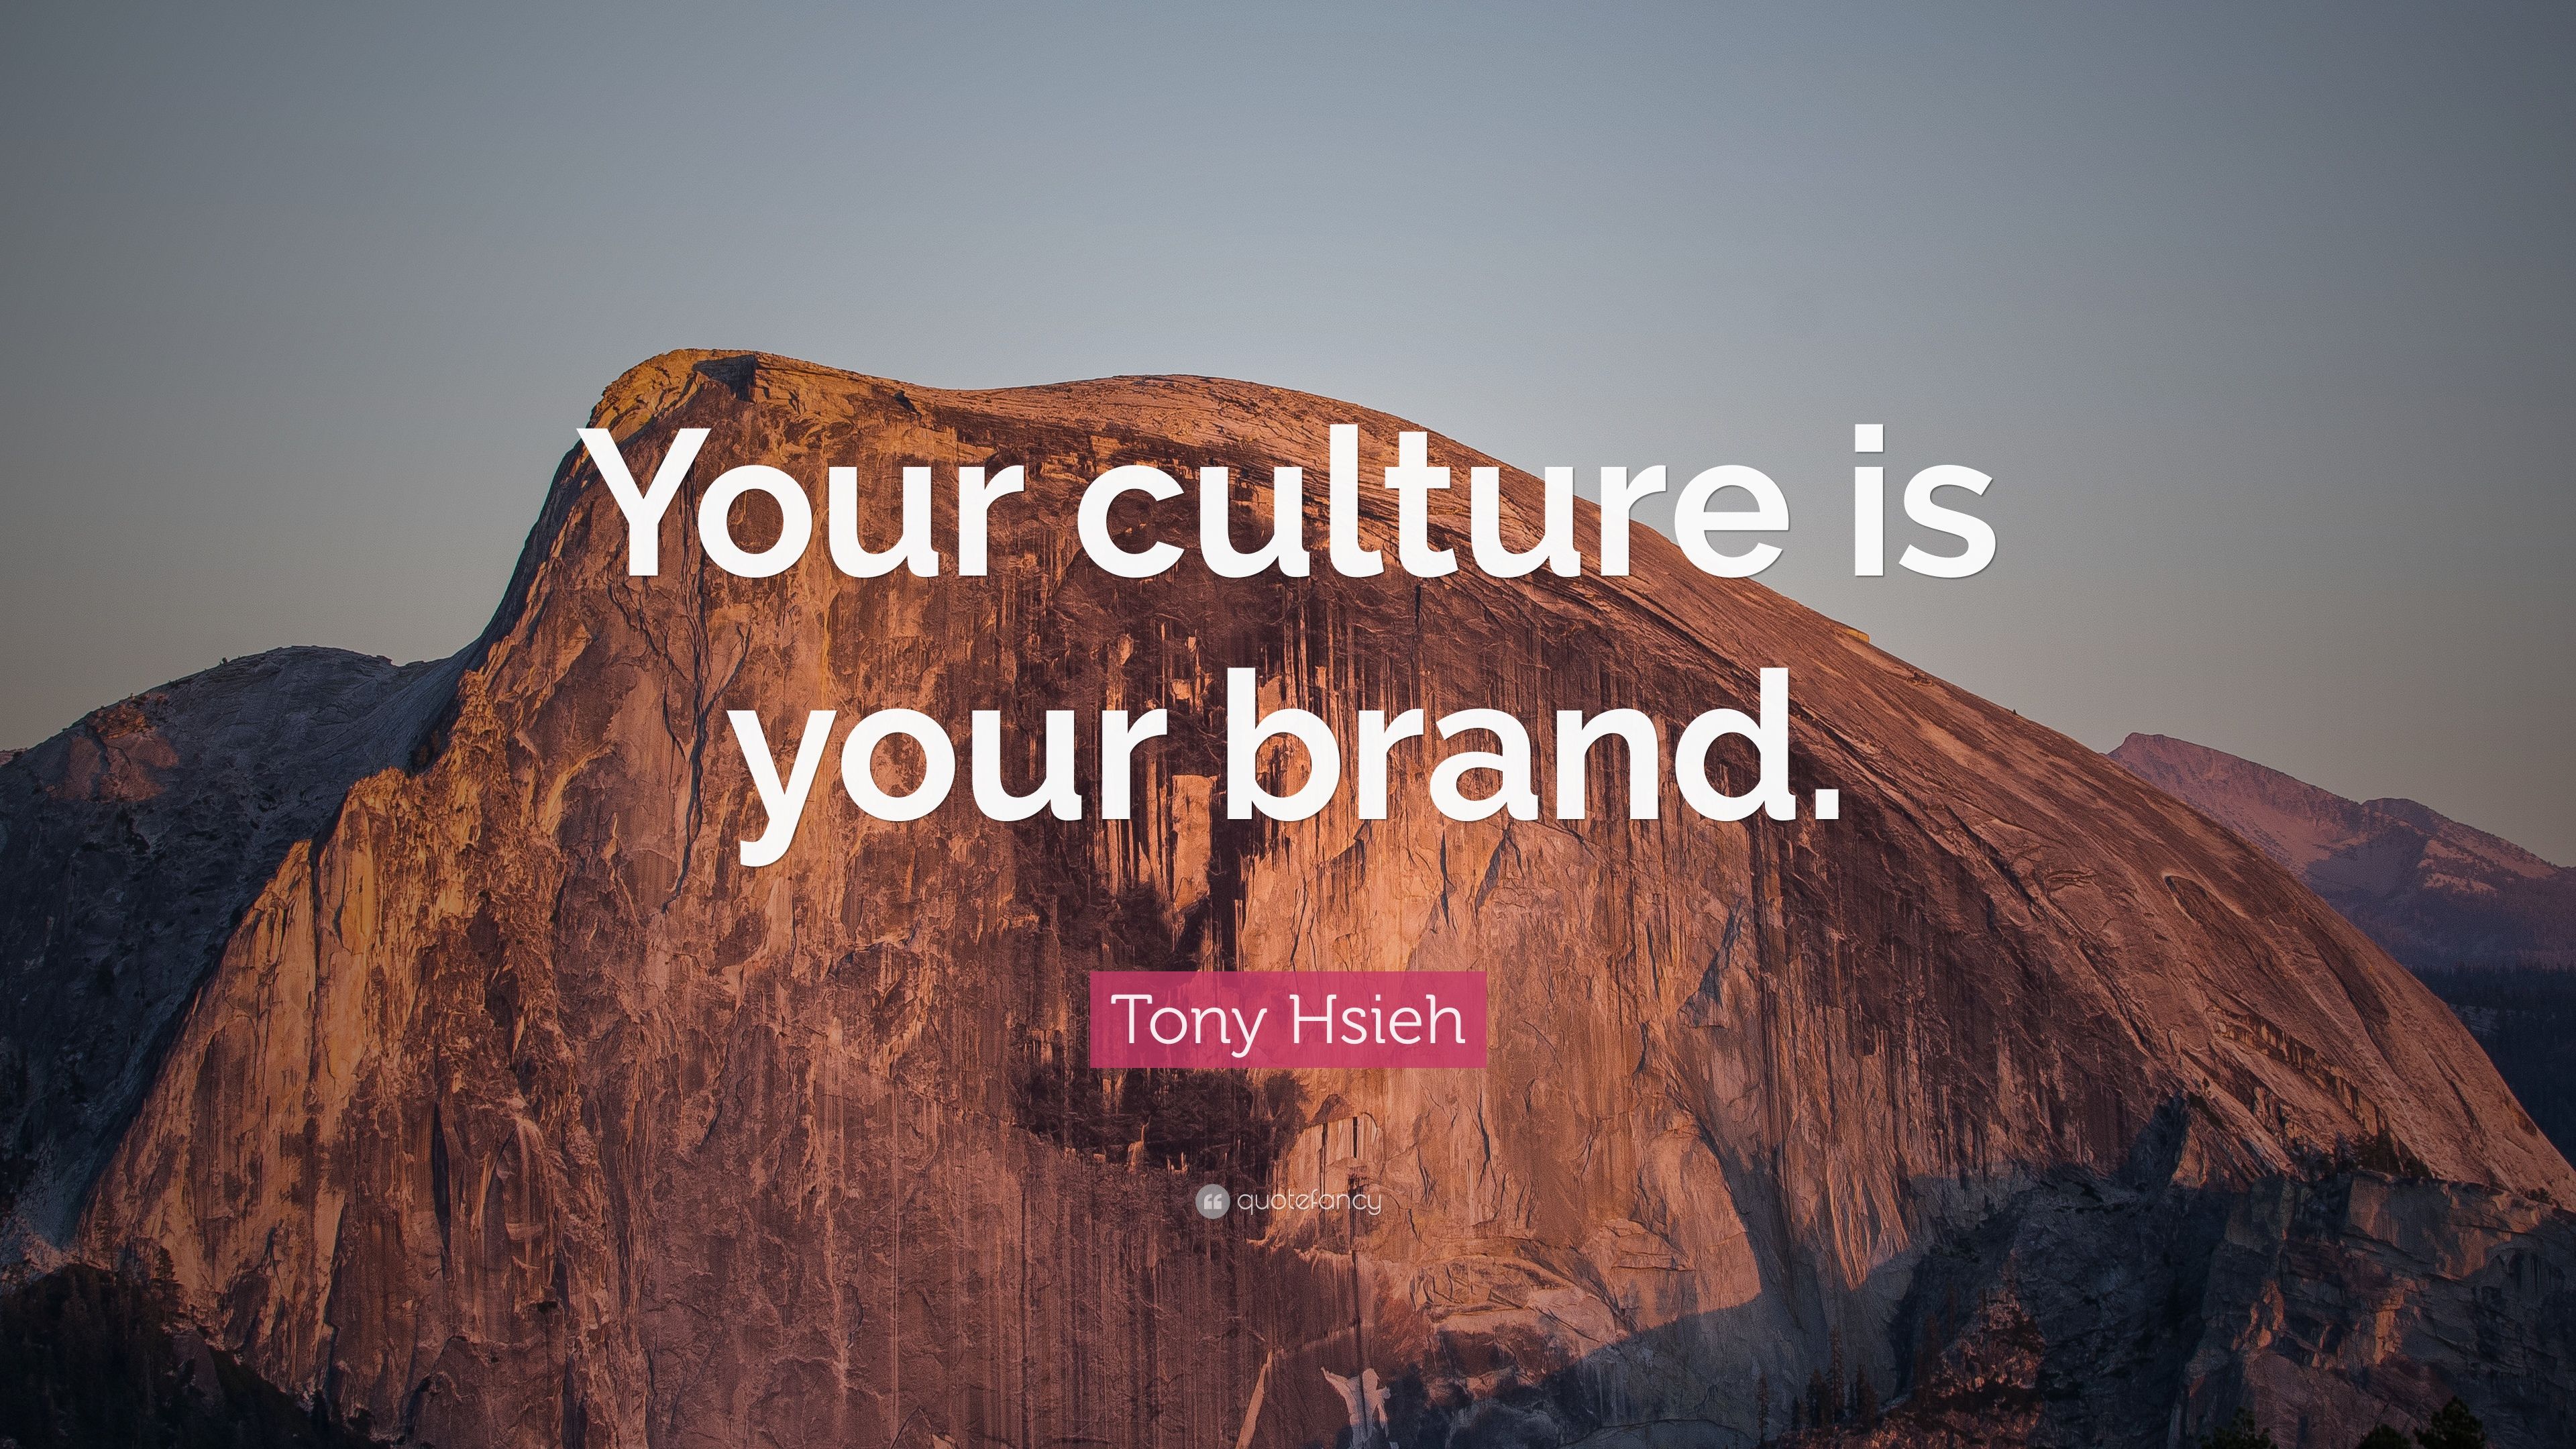 Tony Hsieh Quote: “Your culture is your brand.” 12 wallpaper